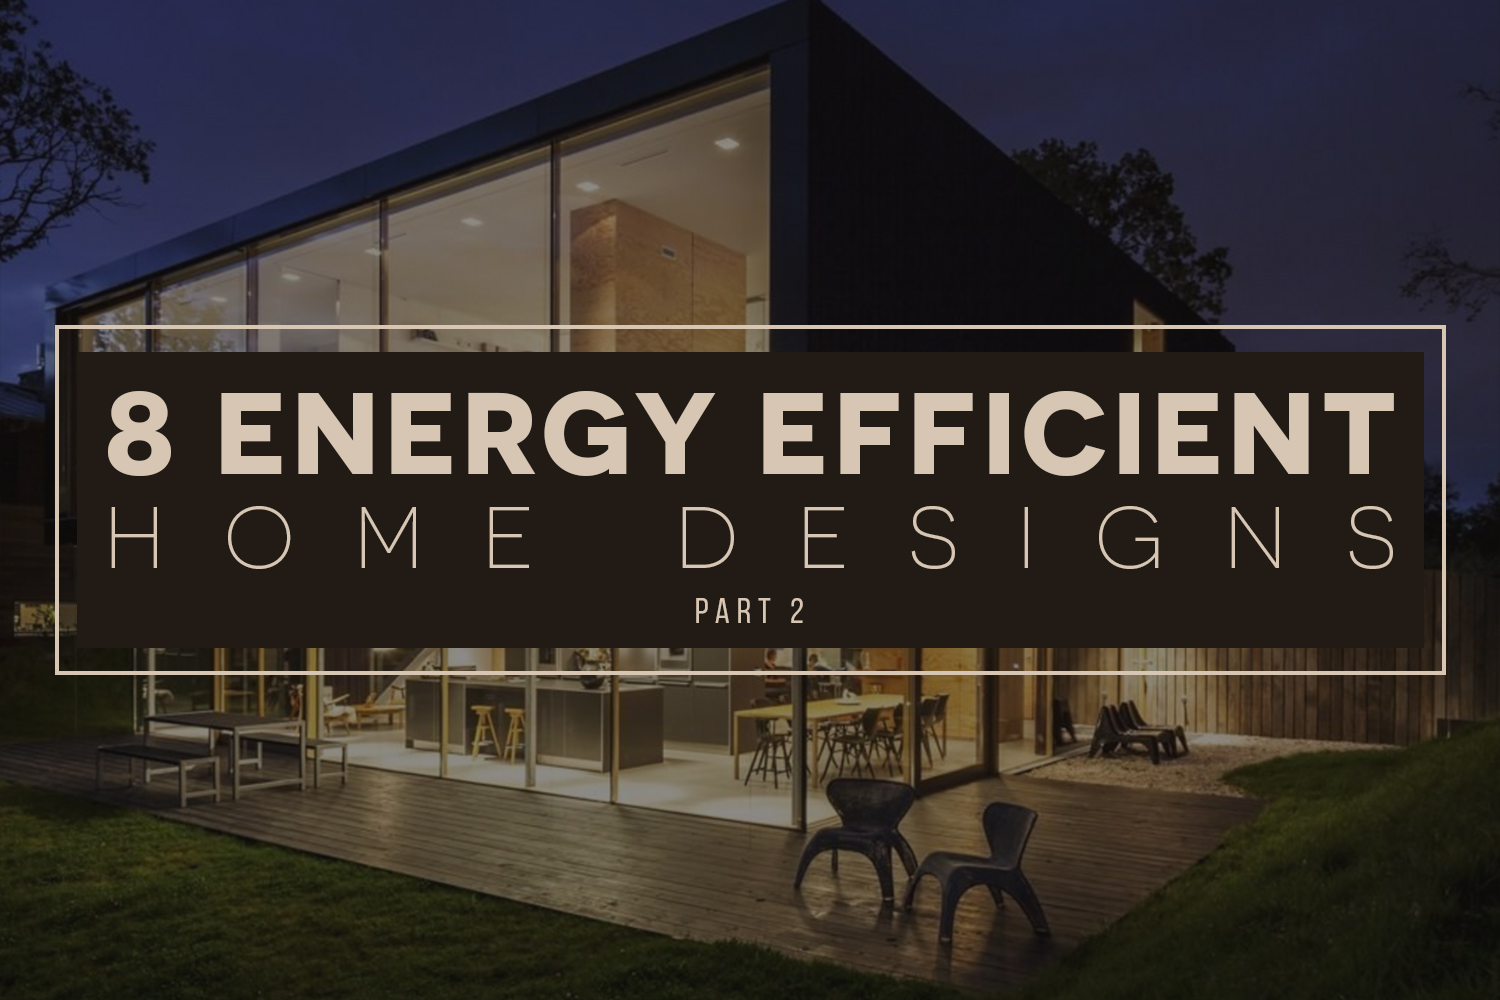 Report: 8 Trends in Energy Efficient Home Design for 2016 - [PART 2